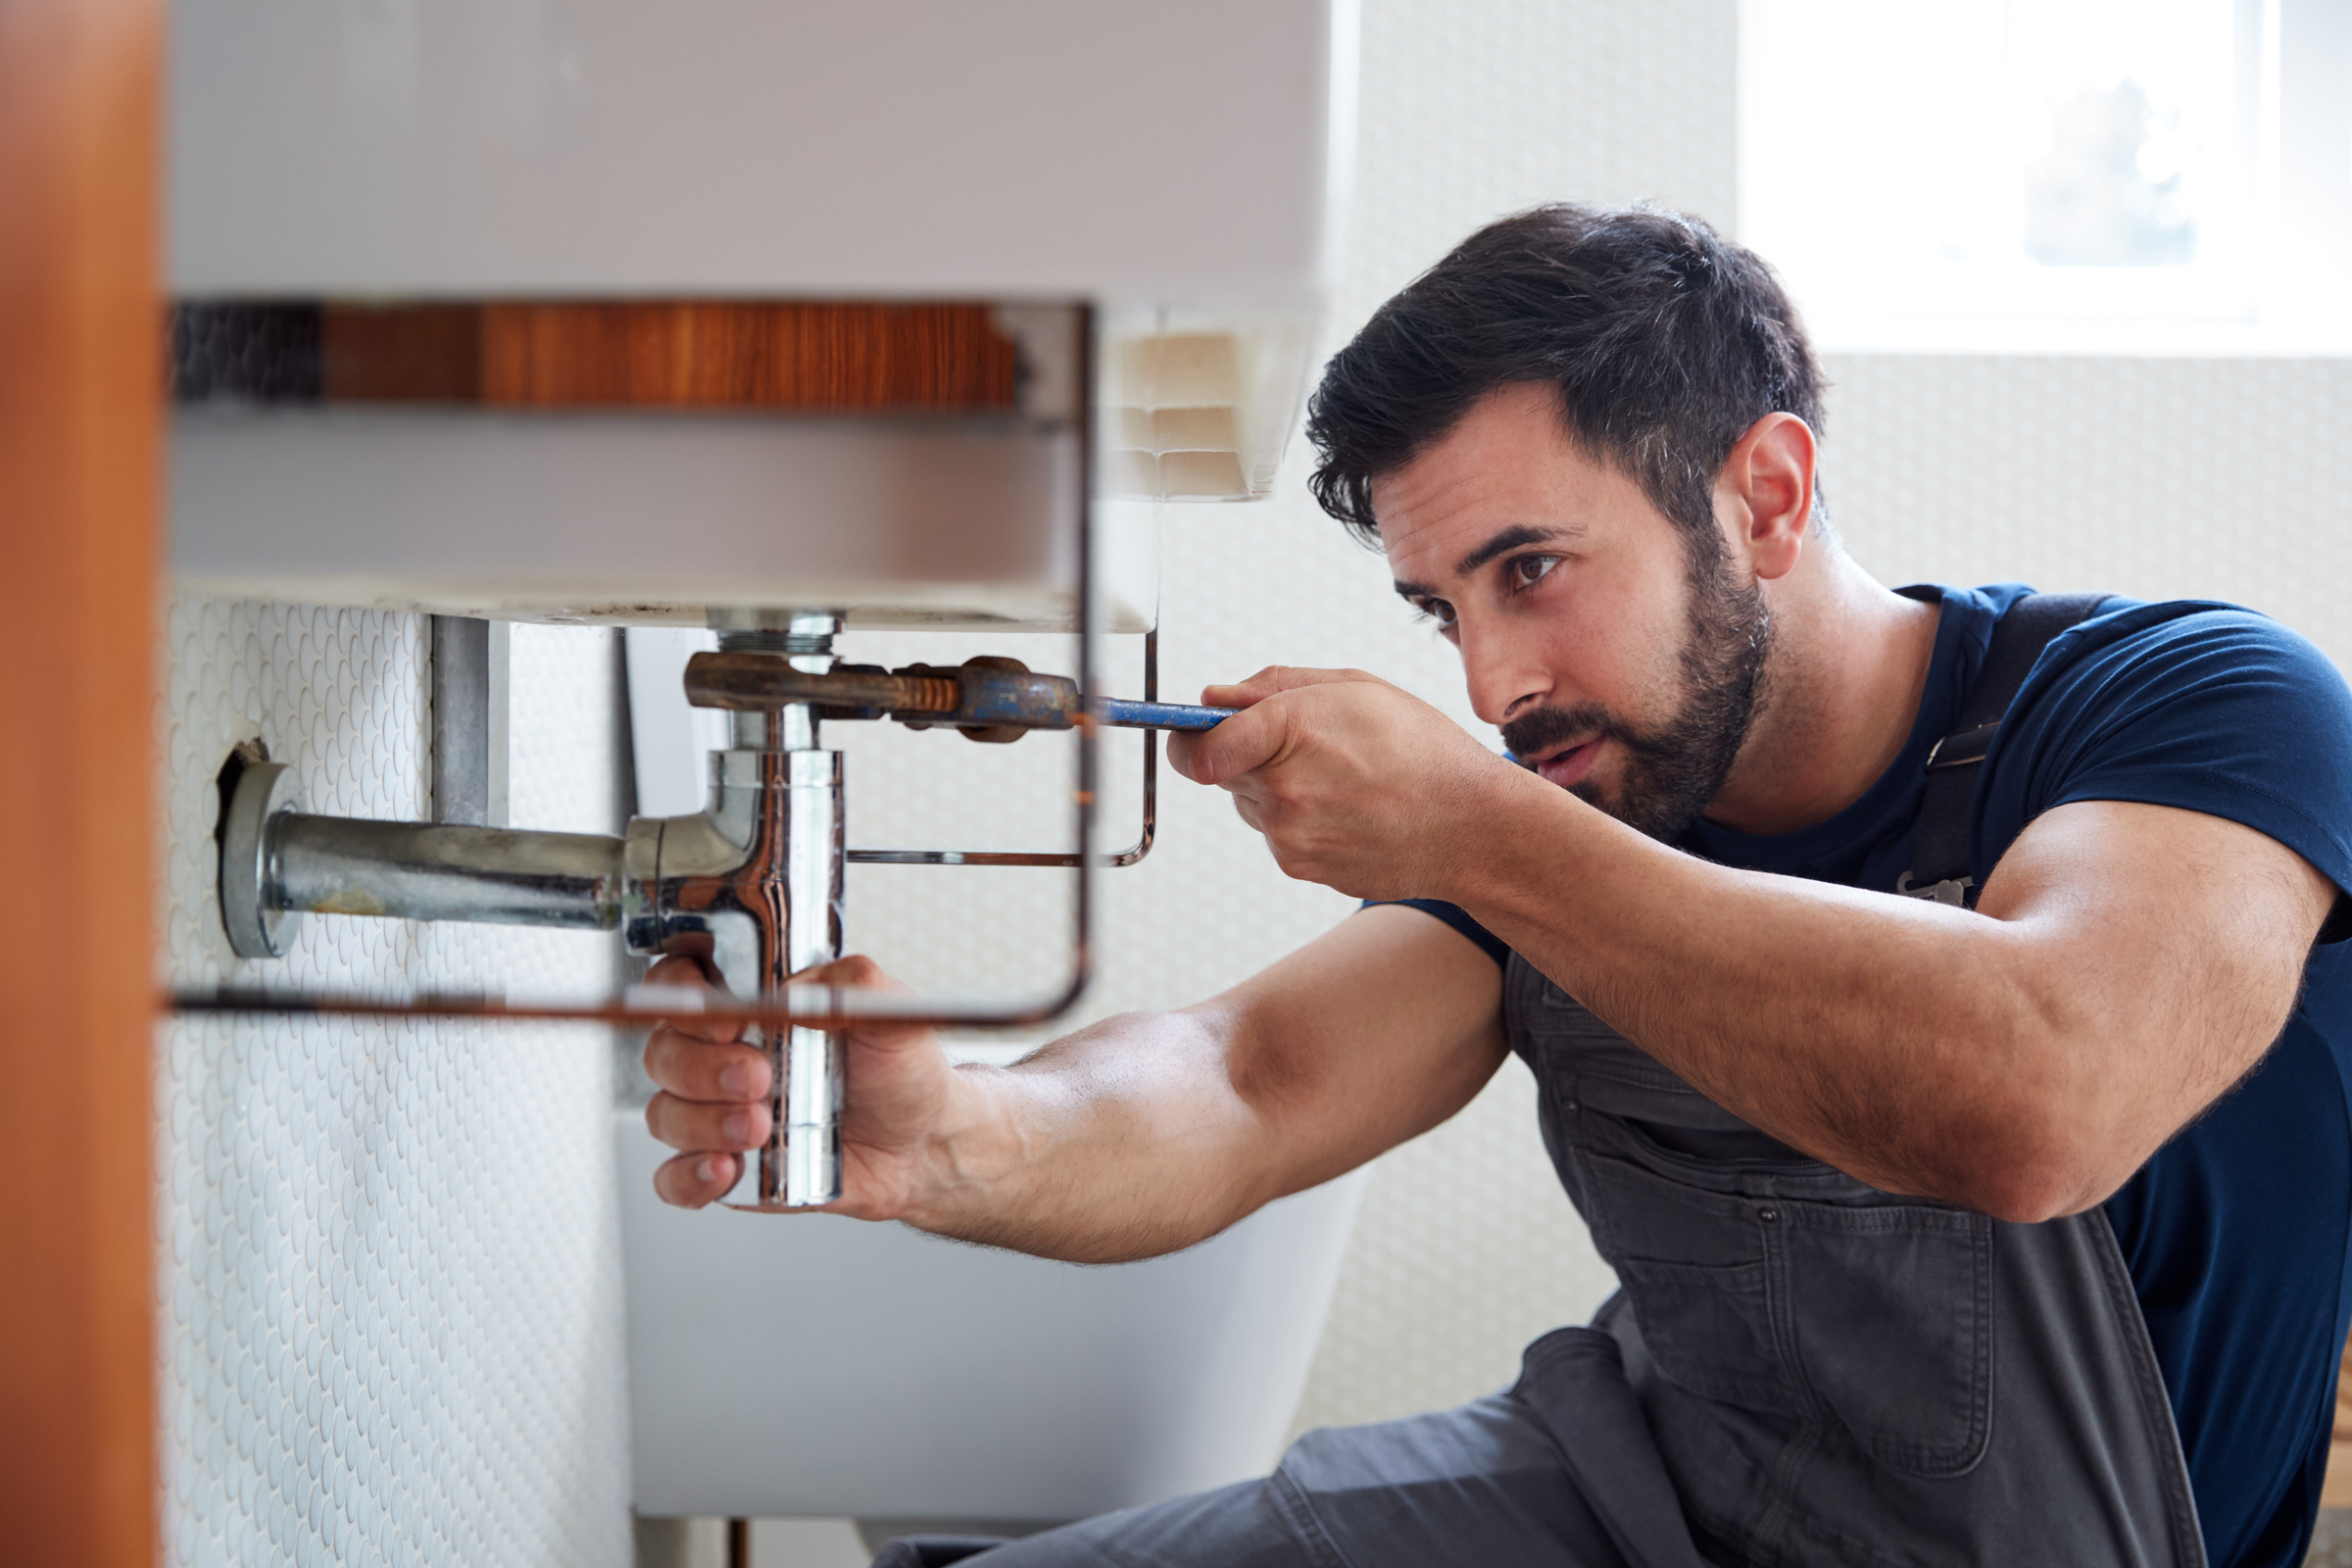 professional, qualified local plumbers, PLUMBING MAINTENANCE, Drainage Cleaning, Leaky Pipes, Dripping Faucet, sewer Repairs, Low Water Pressure, Running Toilet